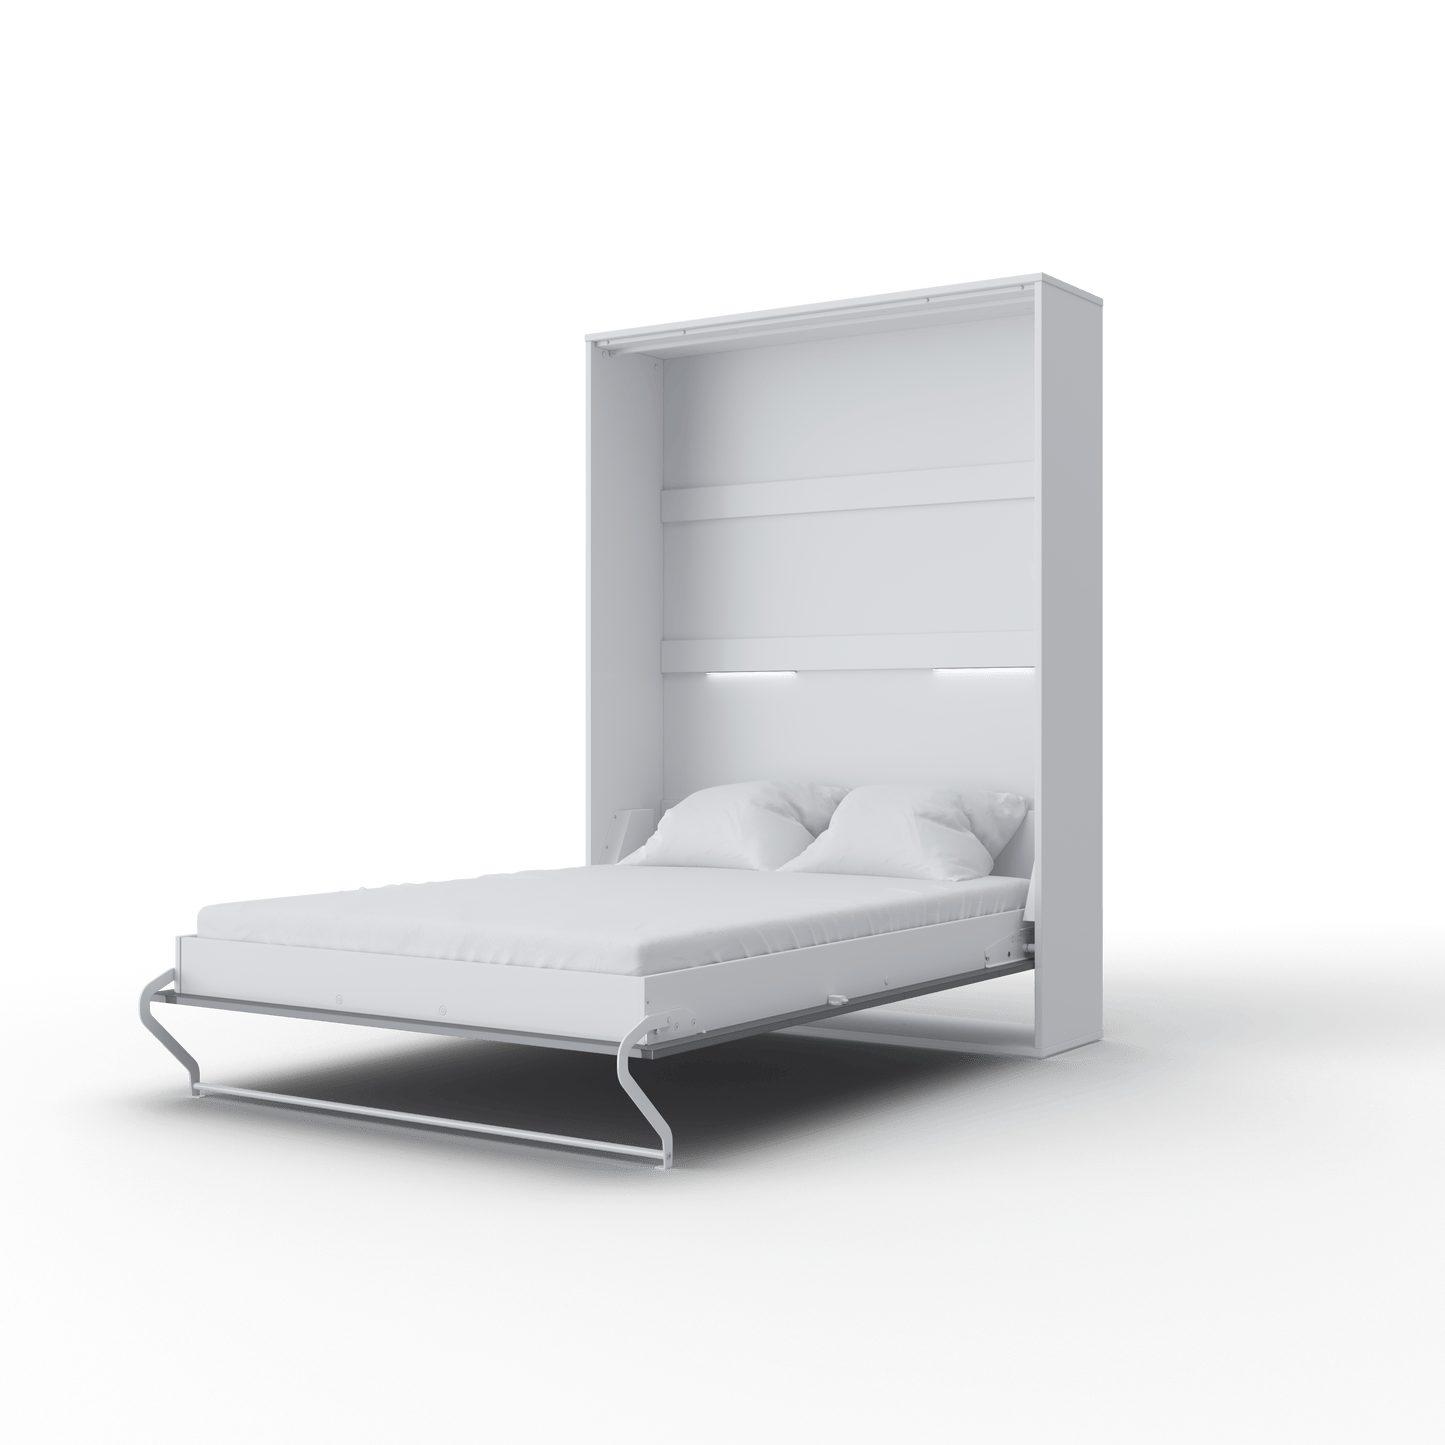 Invento Vertical European FULL XL Wall Bed with LED